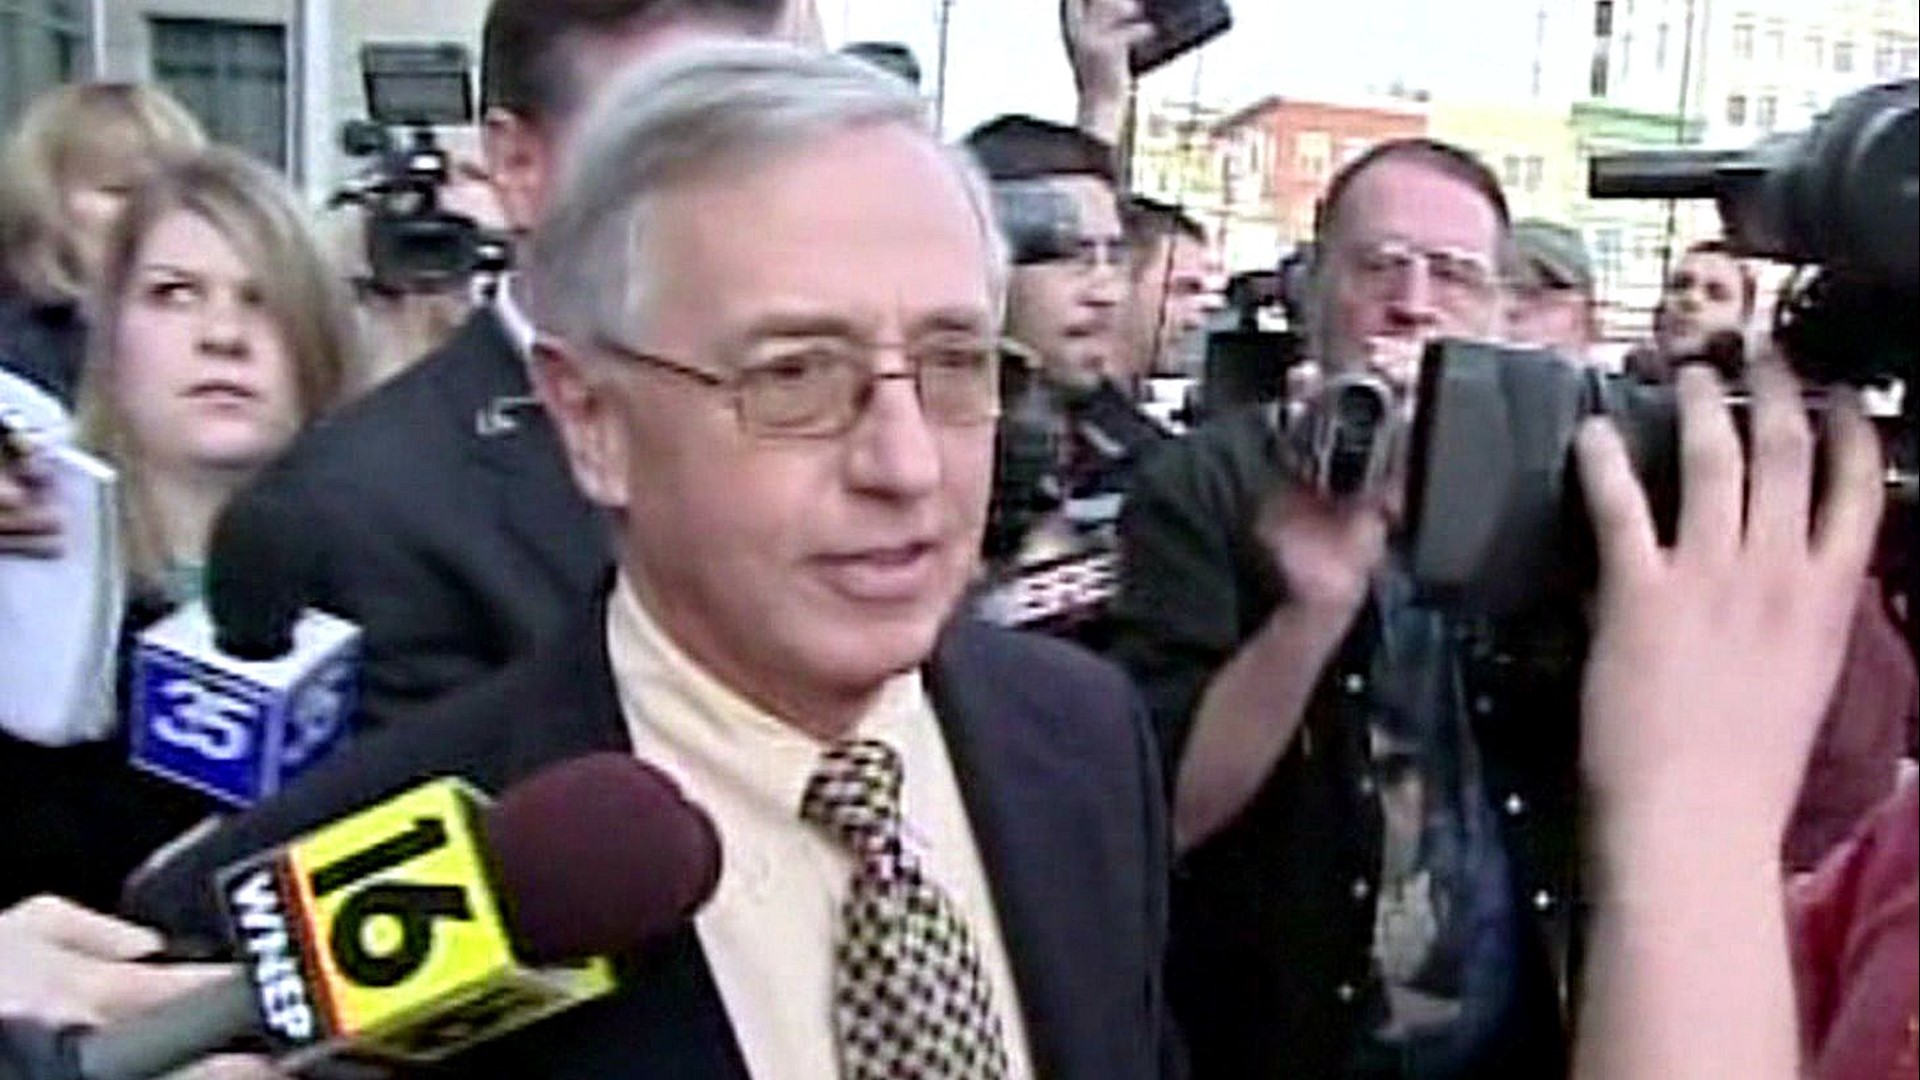 Ciavarella convicted in "Kids for Cash" scandal.